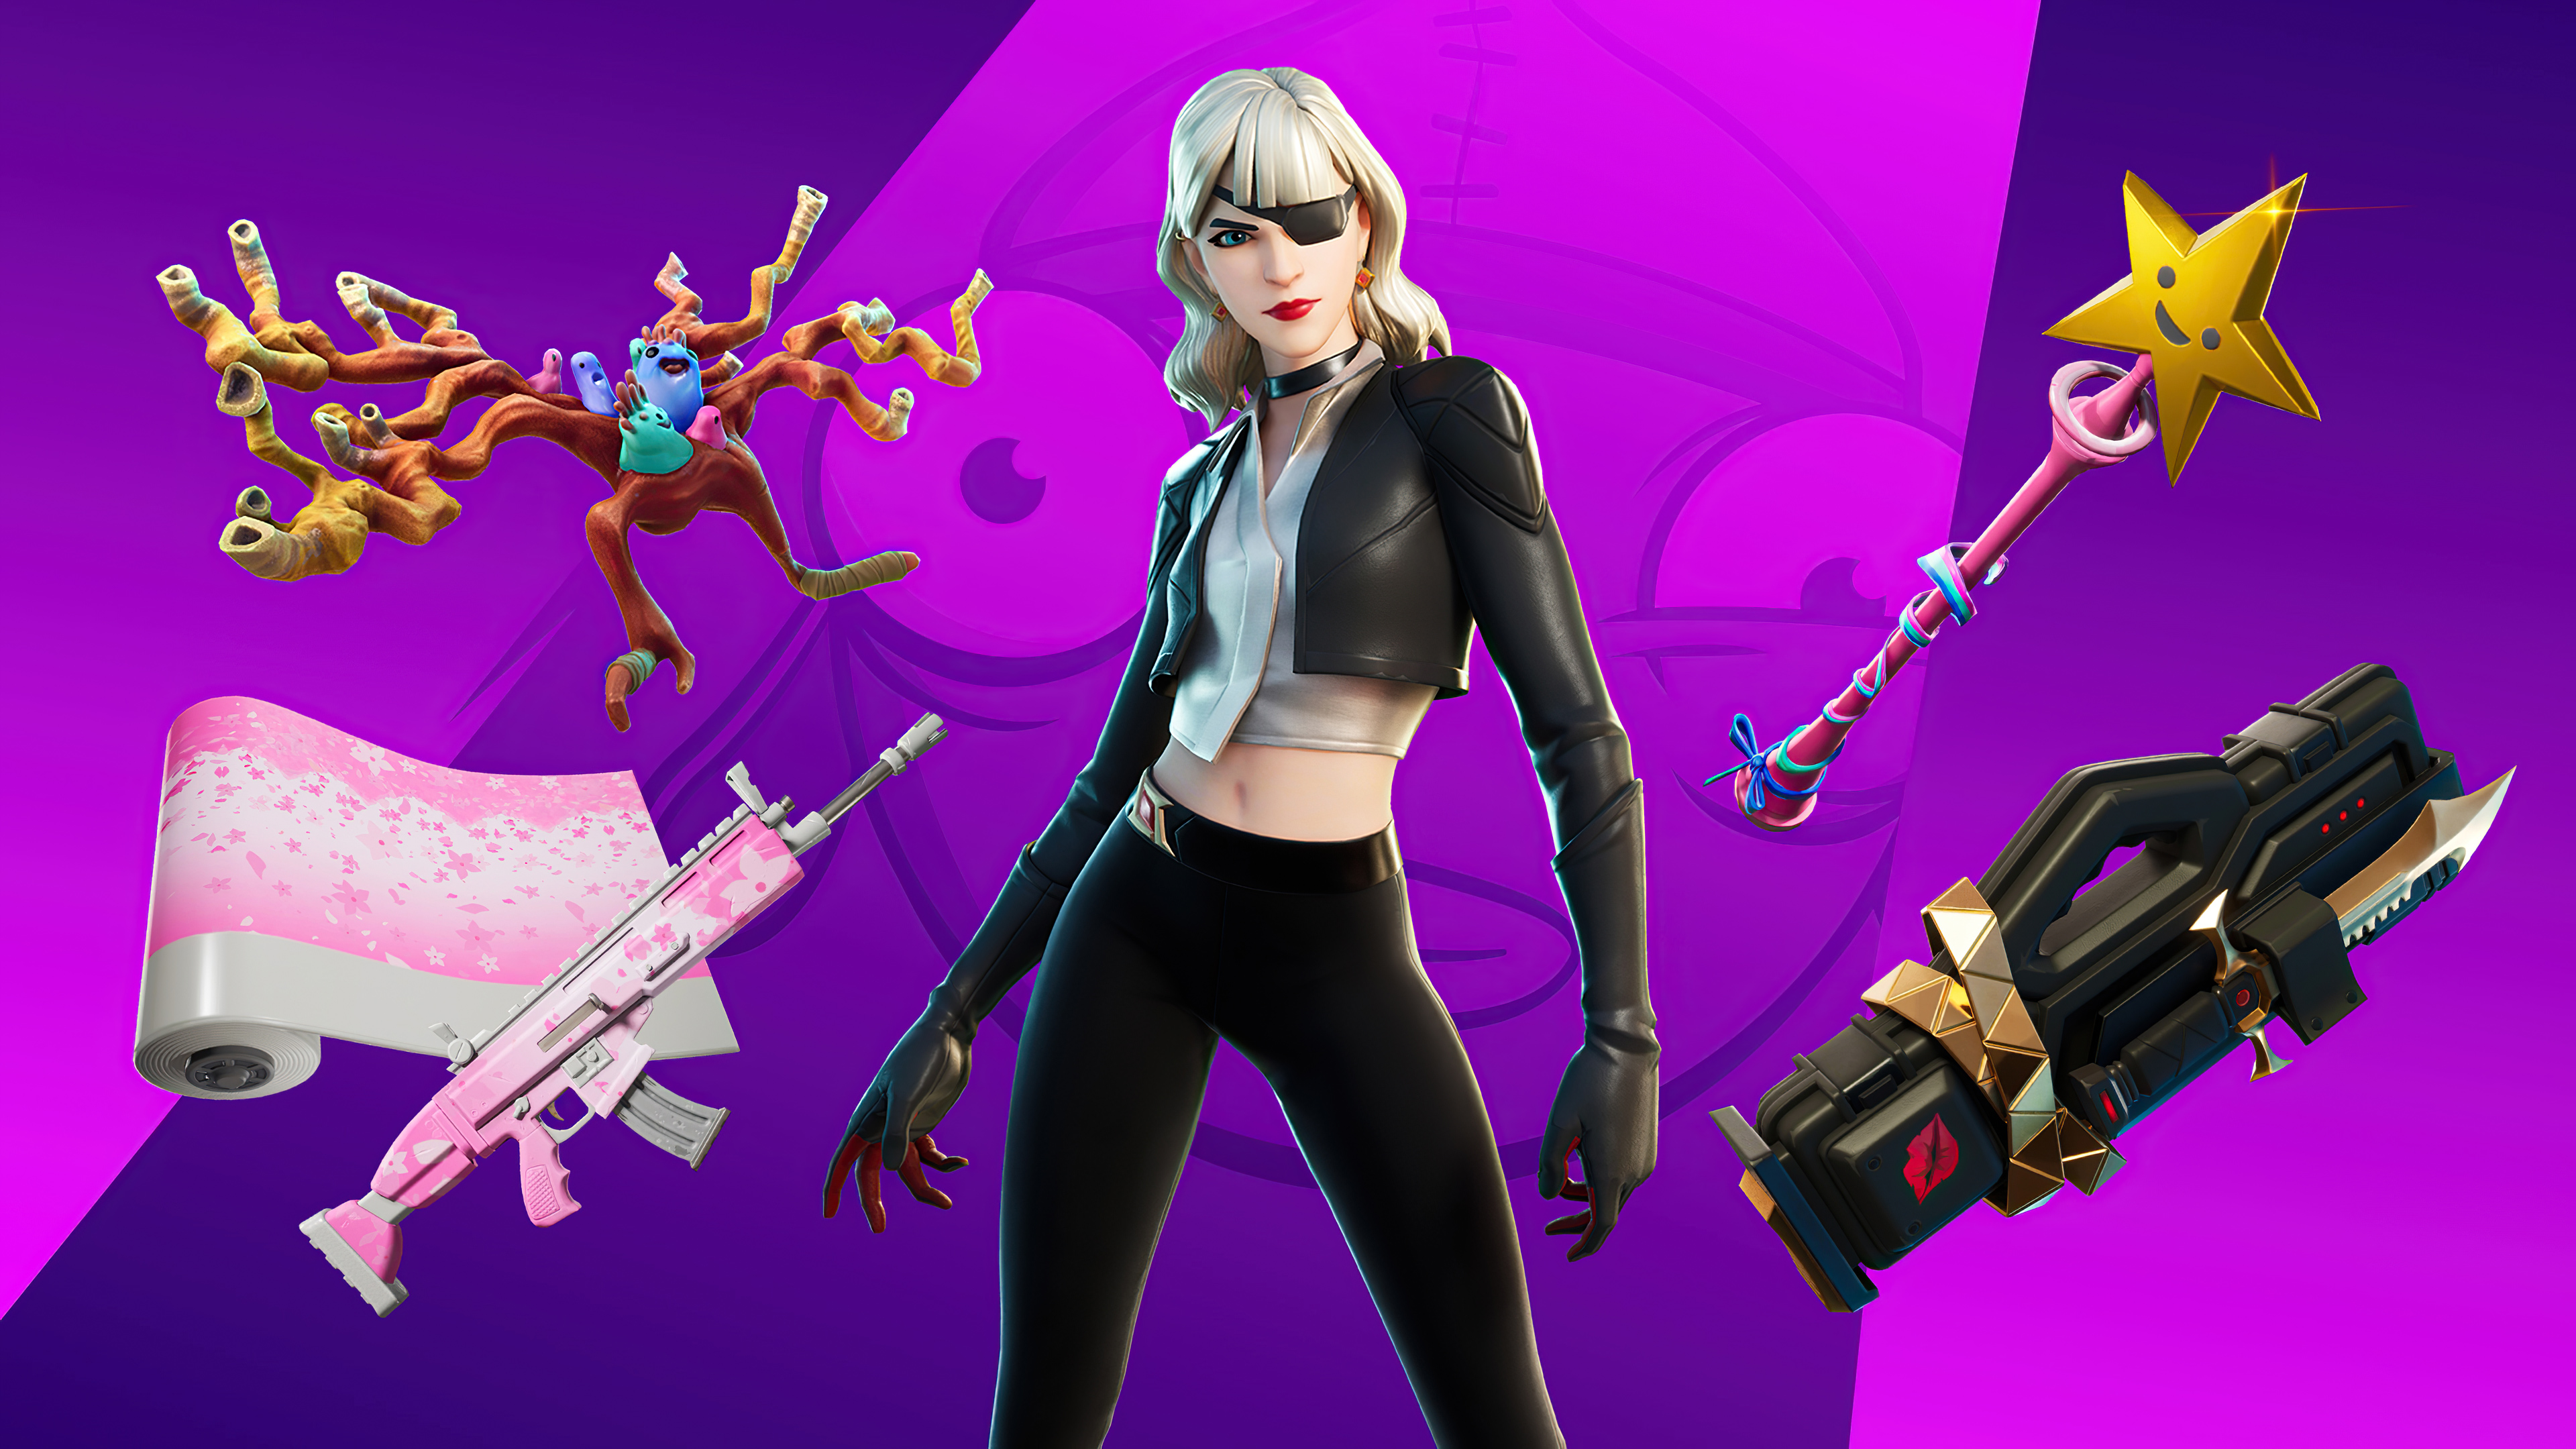 Fortnite wallpapers Best Fortnite wallpapers for iPhone